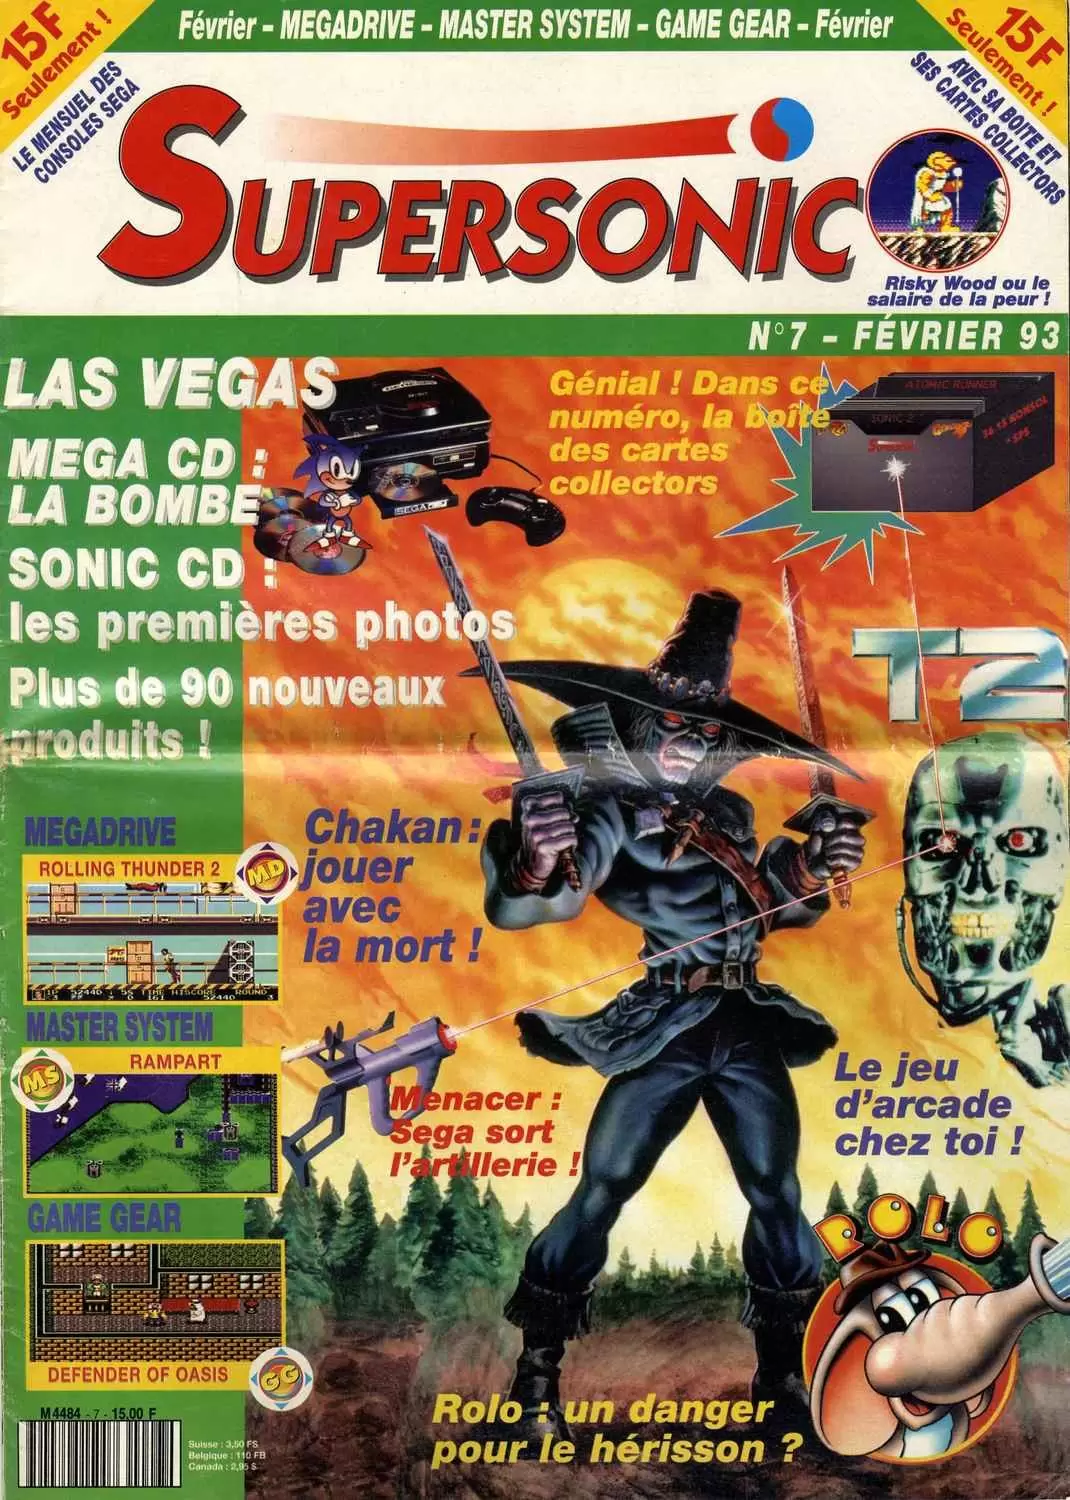 Supersonic - Supersonic n°7